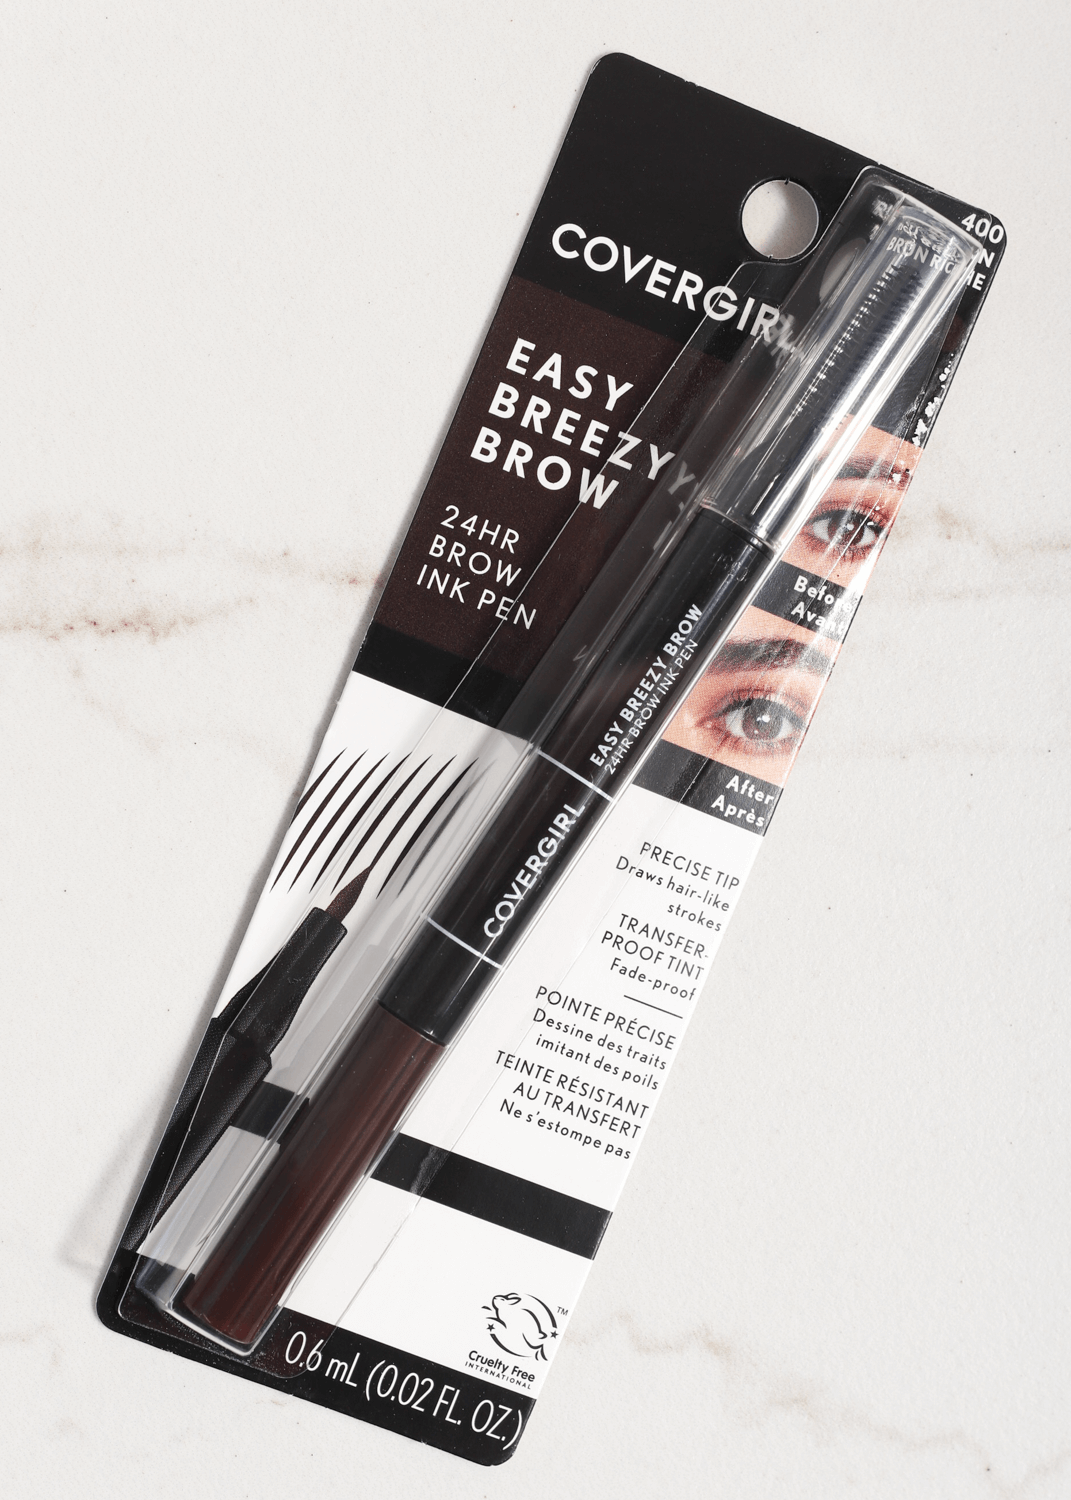 COVERGIRL easy breezy brow All-Day brow ink pen 0.6 ml